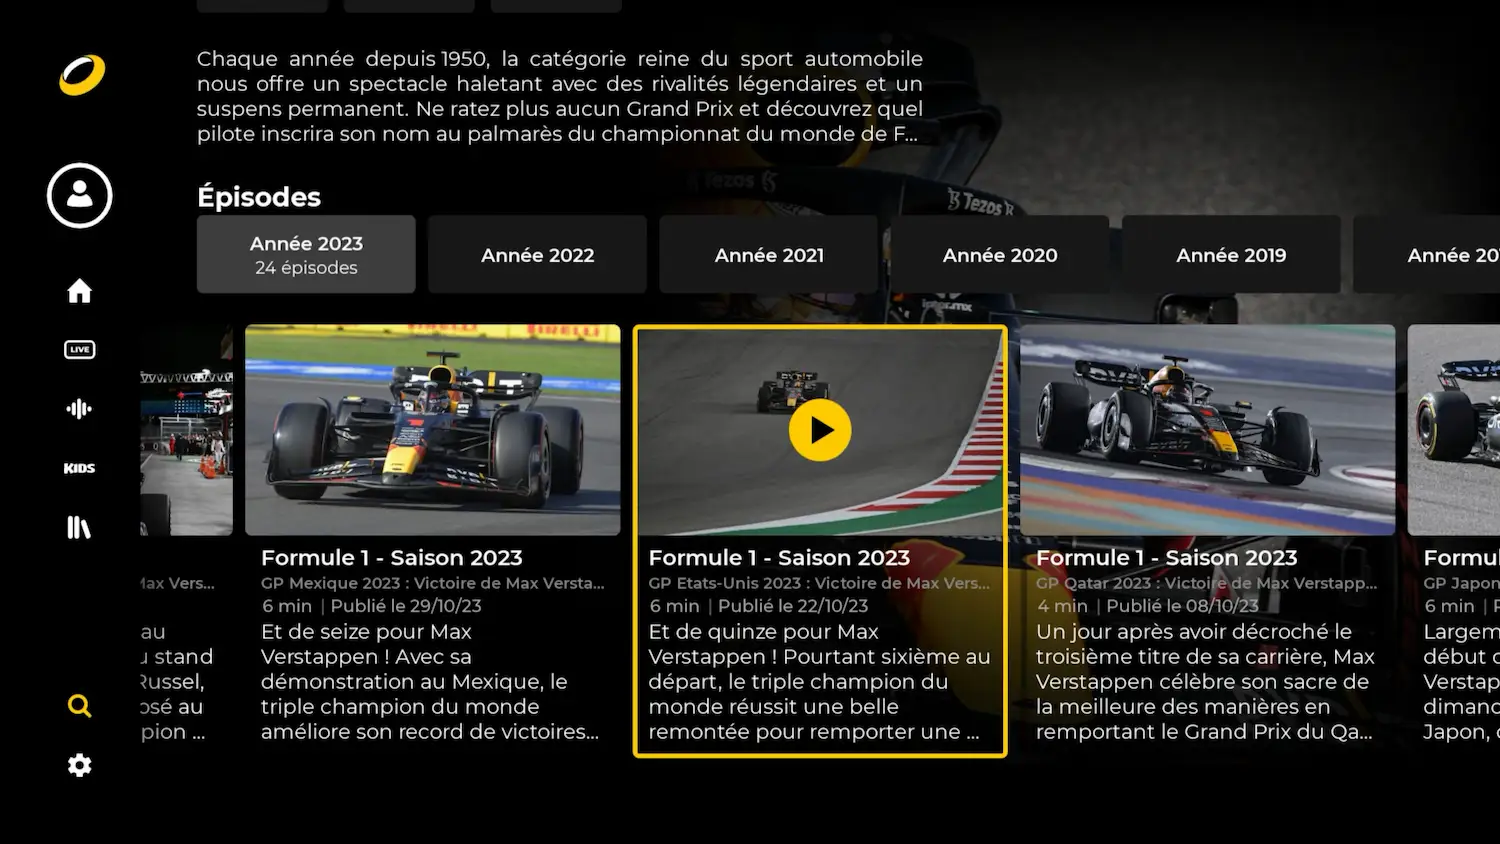 Accessing F1 races on RTBF Auvio's Android TV app